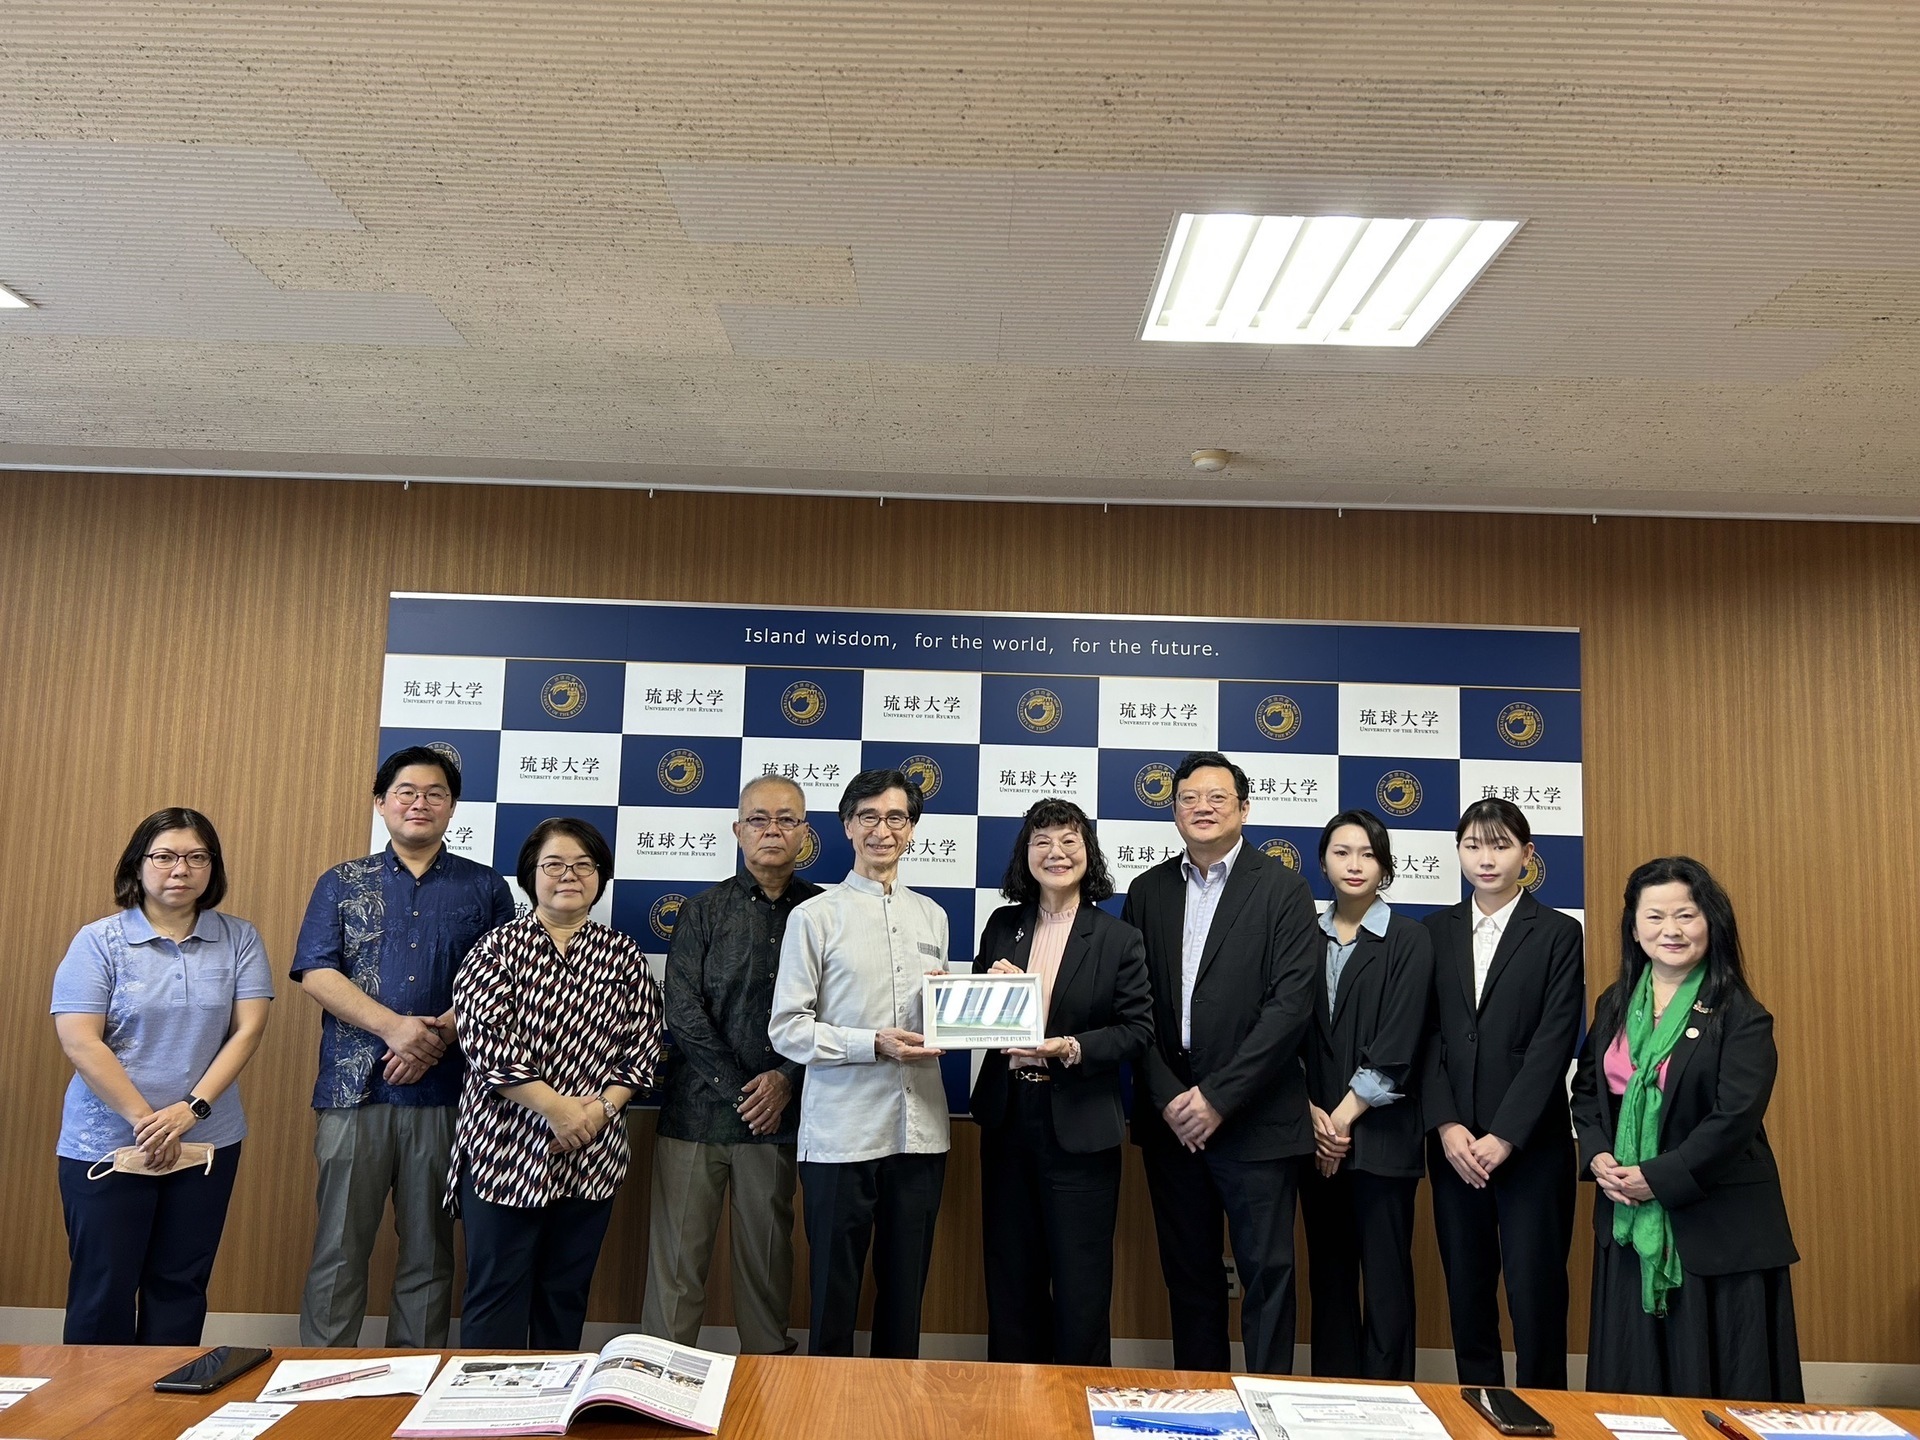 The president of the National University of Kaohsiung (NUK), Yueh-Tuan Chen, led a delegation to Japan, resulting in fruitful exchanges and accomplishments. 002